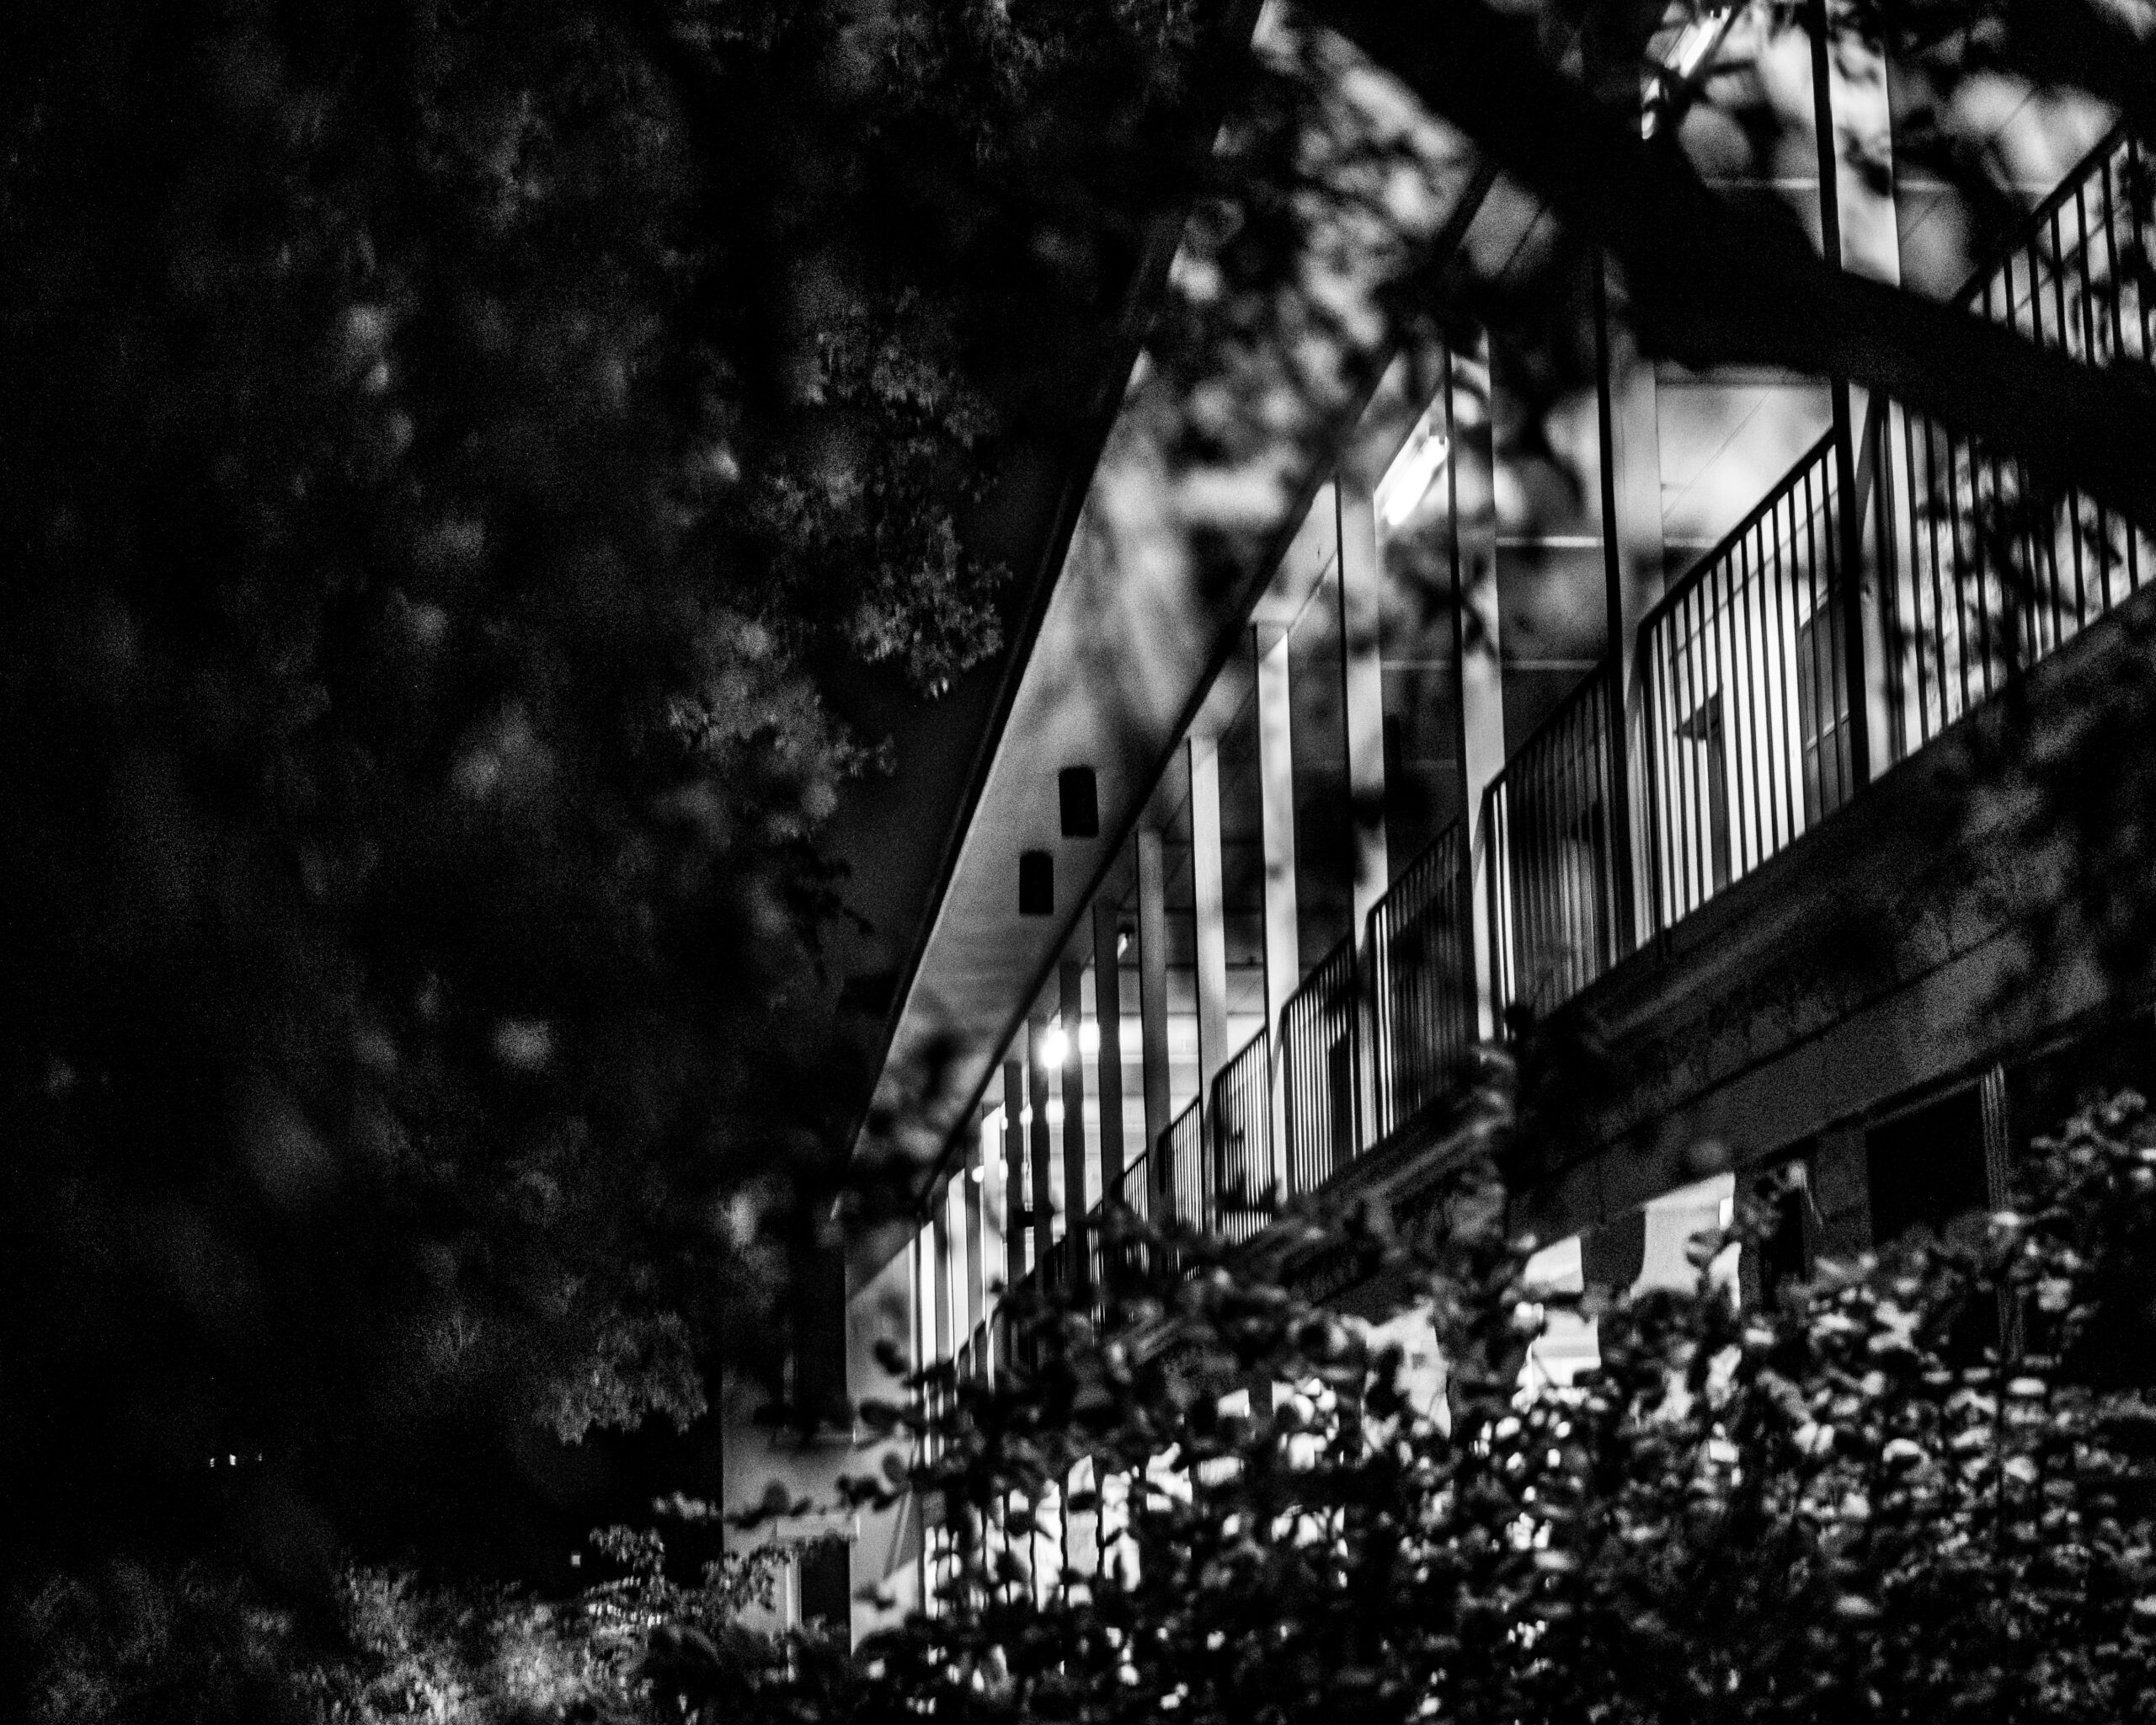 An exterior balcony at the former Confederate Women's Home in Austin, eerily lit and seen through foliage in this black and white photo.